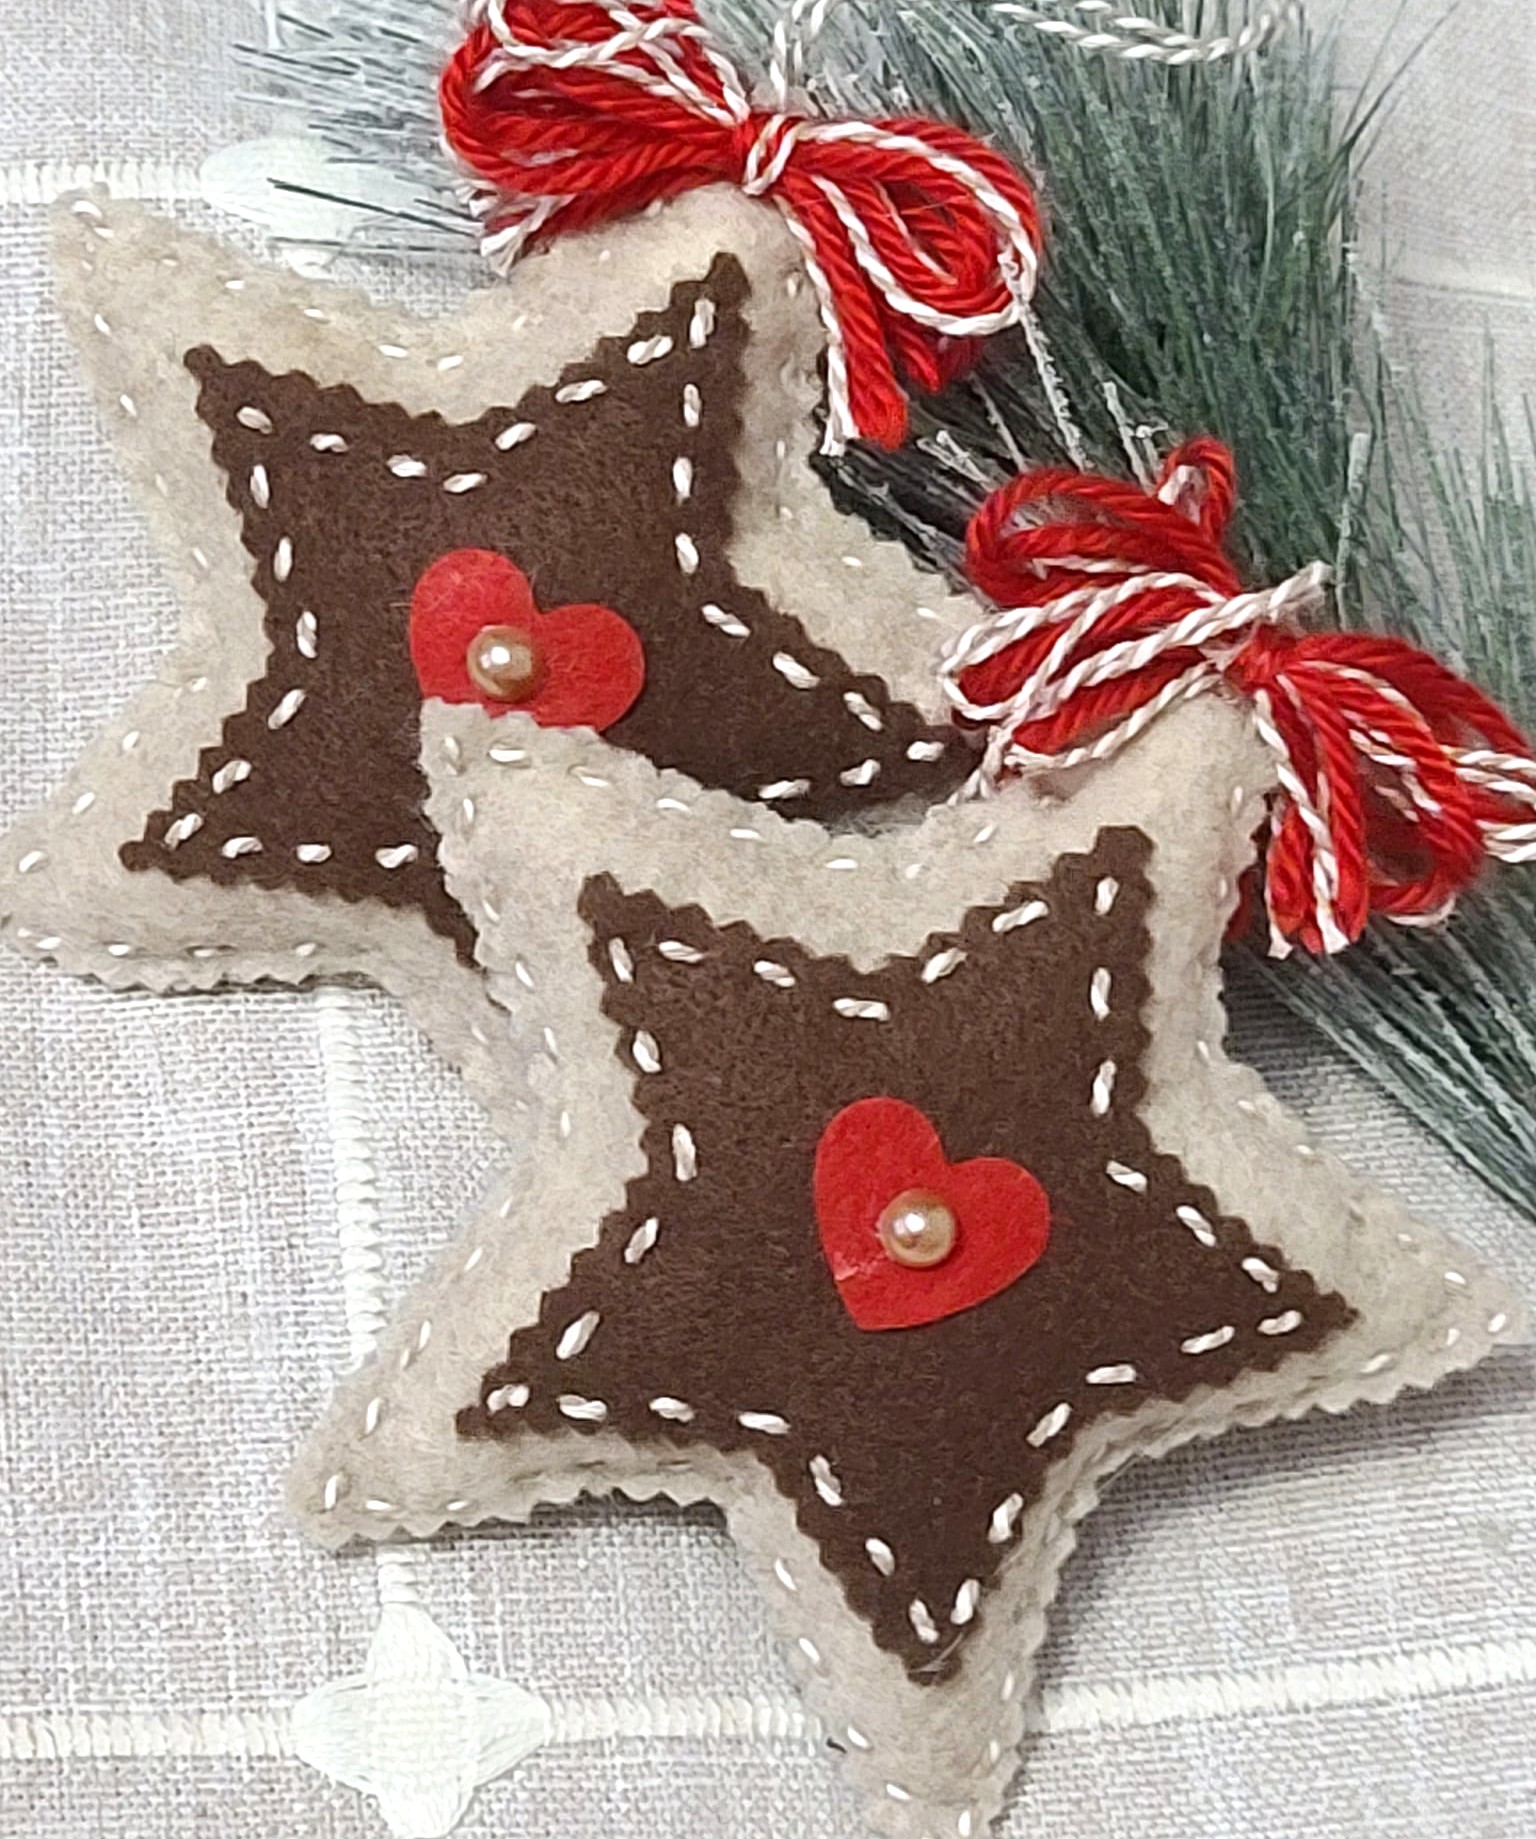 Stars 2-sided Felt Cookie and Chocolate Icing star